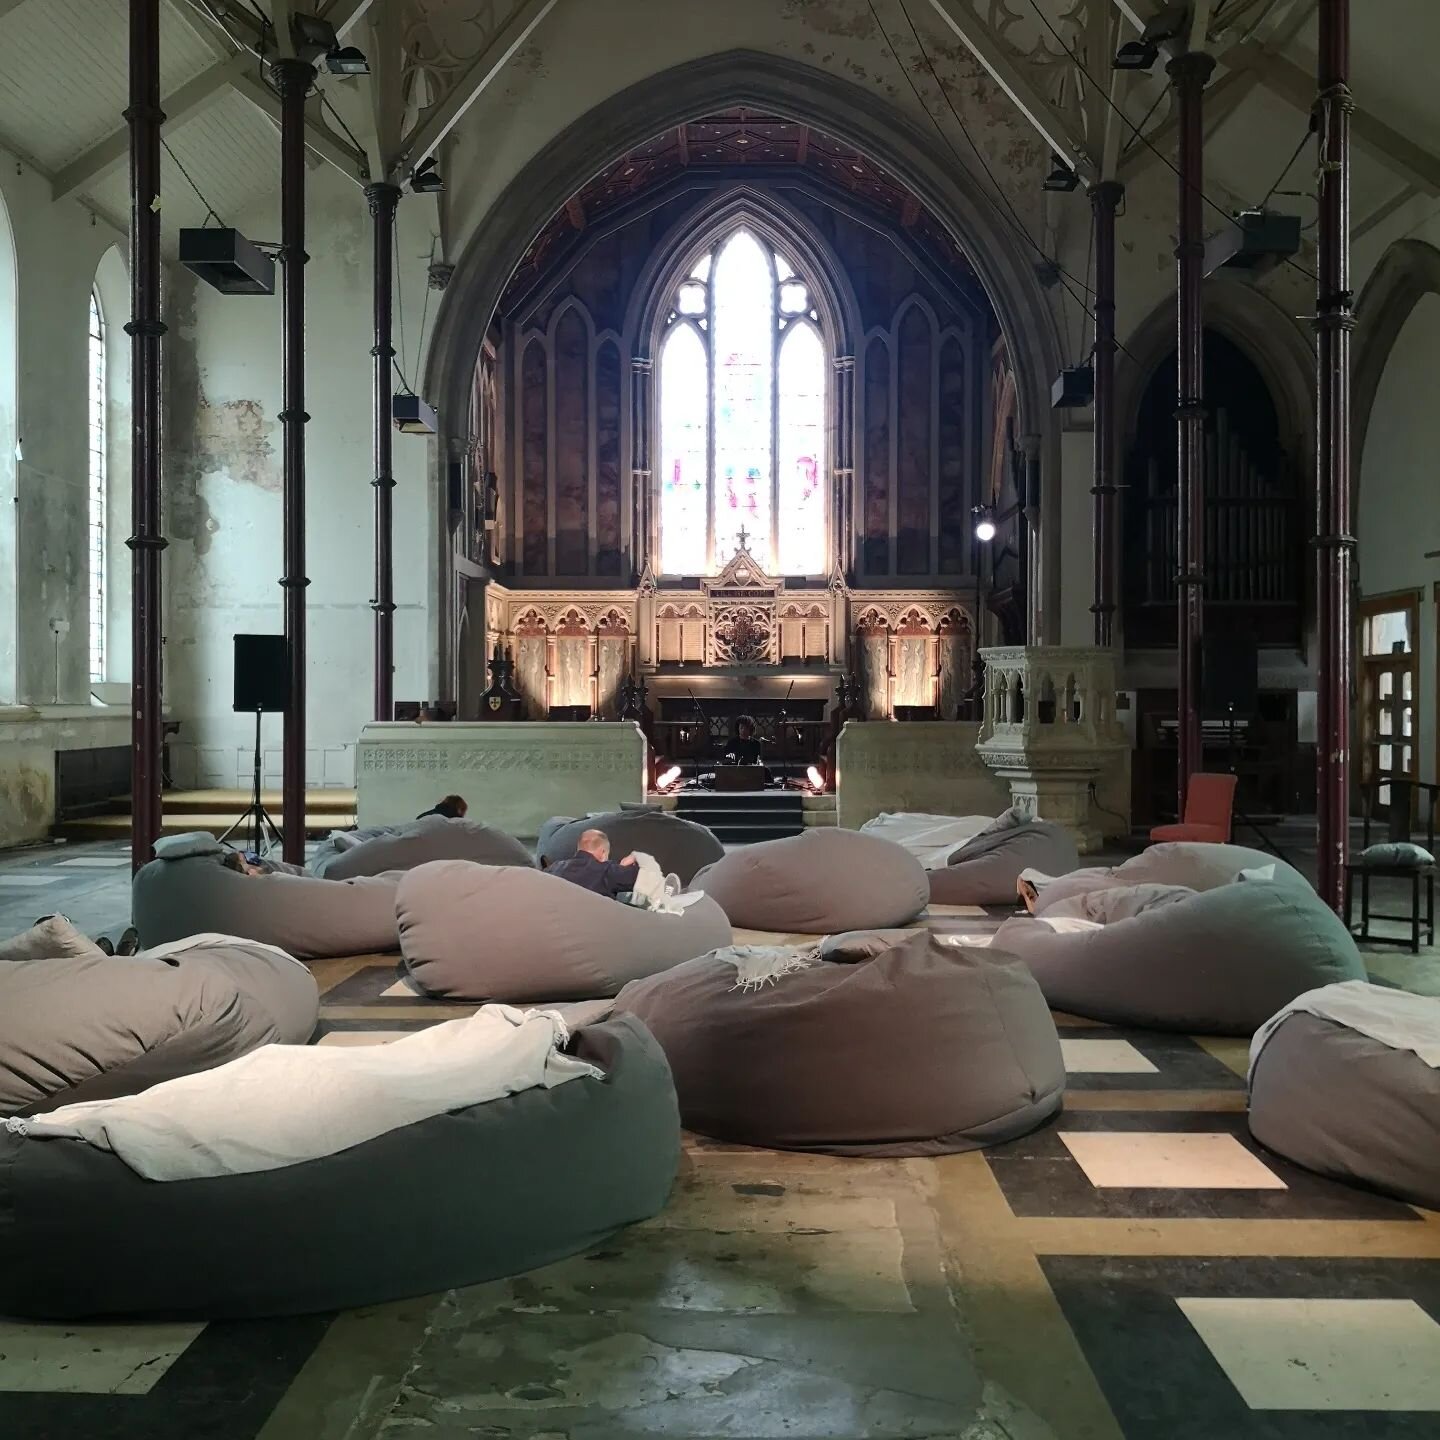 Don't miss my Restorative yoga workshop this Friday 7-9pm @_energyforlife

It was such a pleasure to attend 'A Restorative' by @sheilaghelani  as part of this year's @brightonfestival.

That first picture above is the set up in the gorgeous @thespire